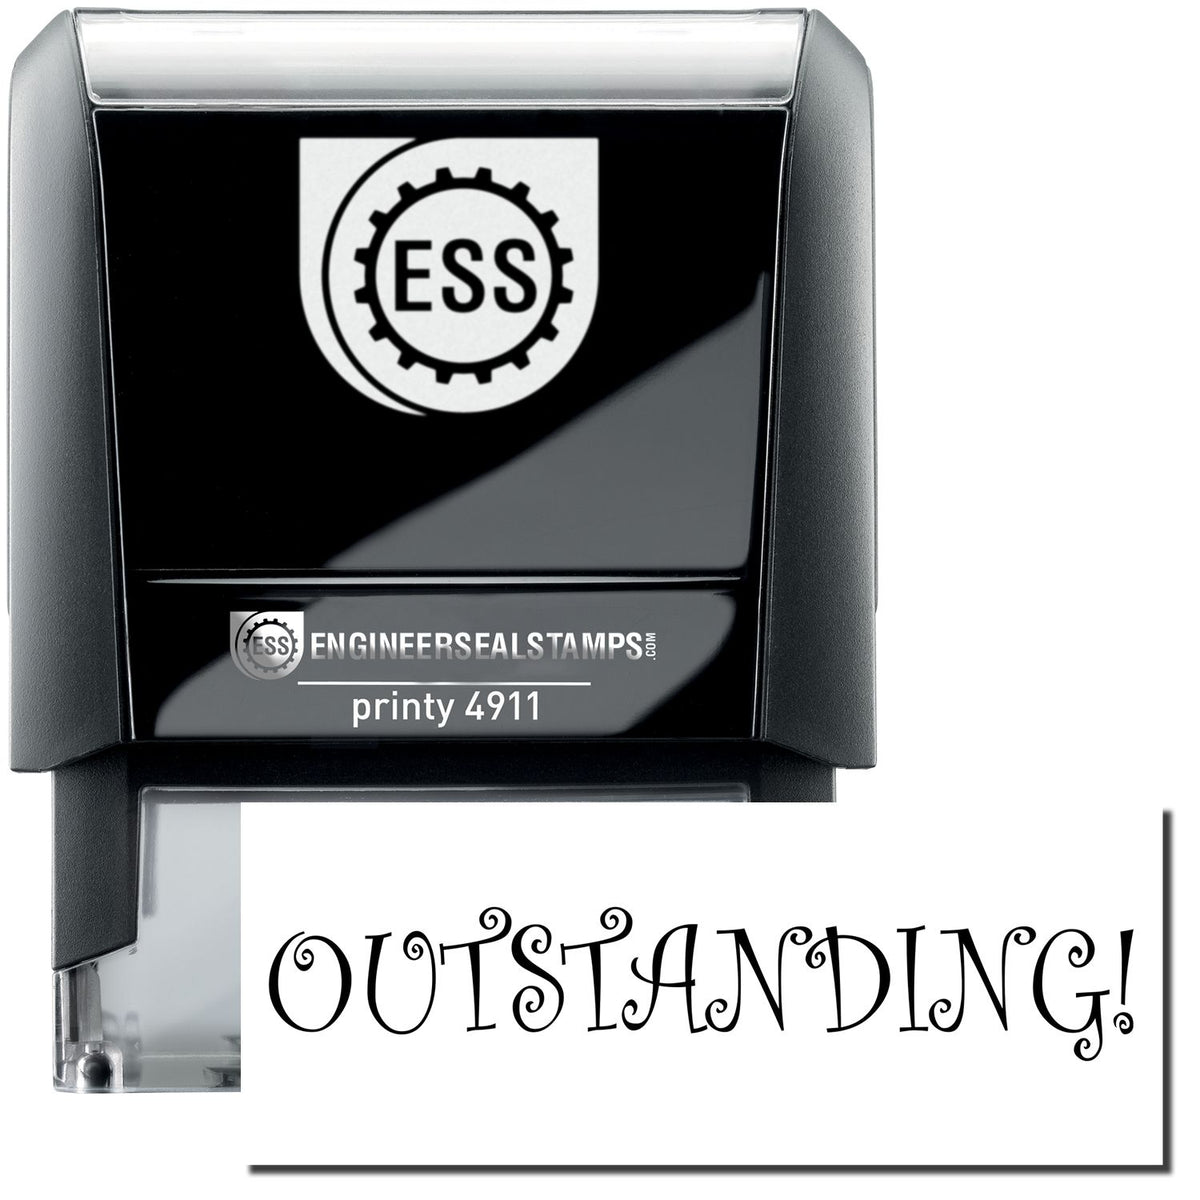 A self-inking stamp with a stamped image showing how the text &quot;OUTSTANDING!&quot; is displayed after stamping.